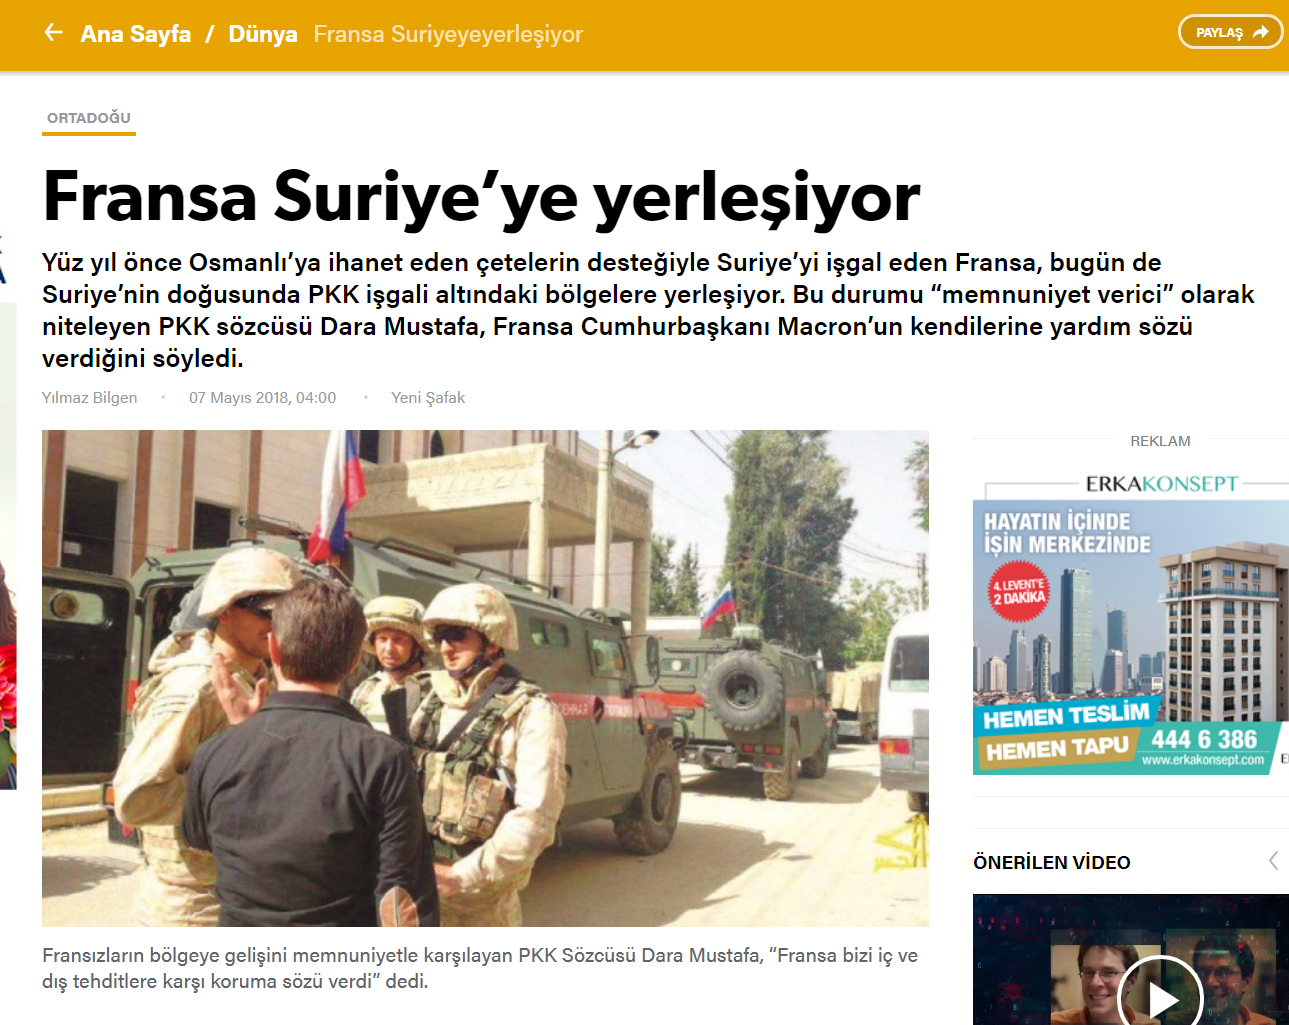 The Turkish newspaper Yeni afak writes that France has begun the transfer of forces to Syria. - Syria, Turkey, France, Politics, The photo, Russia, Screenshot, Professional